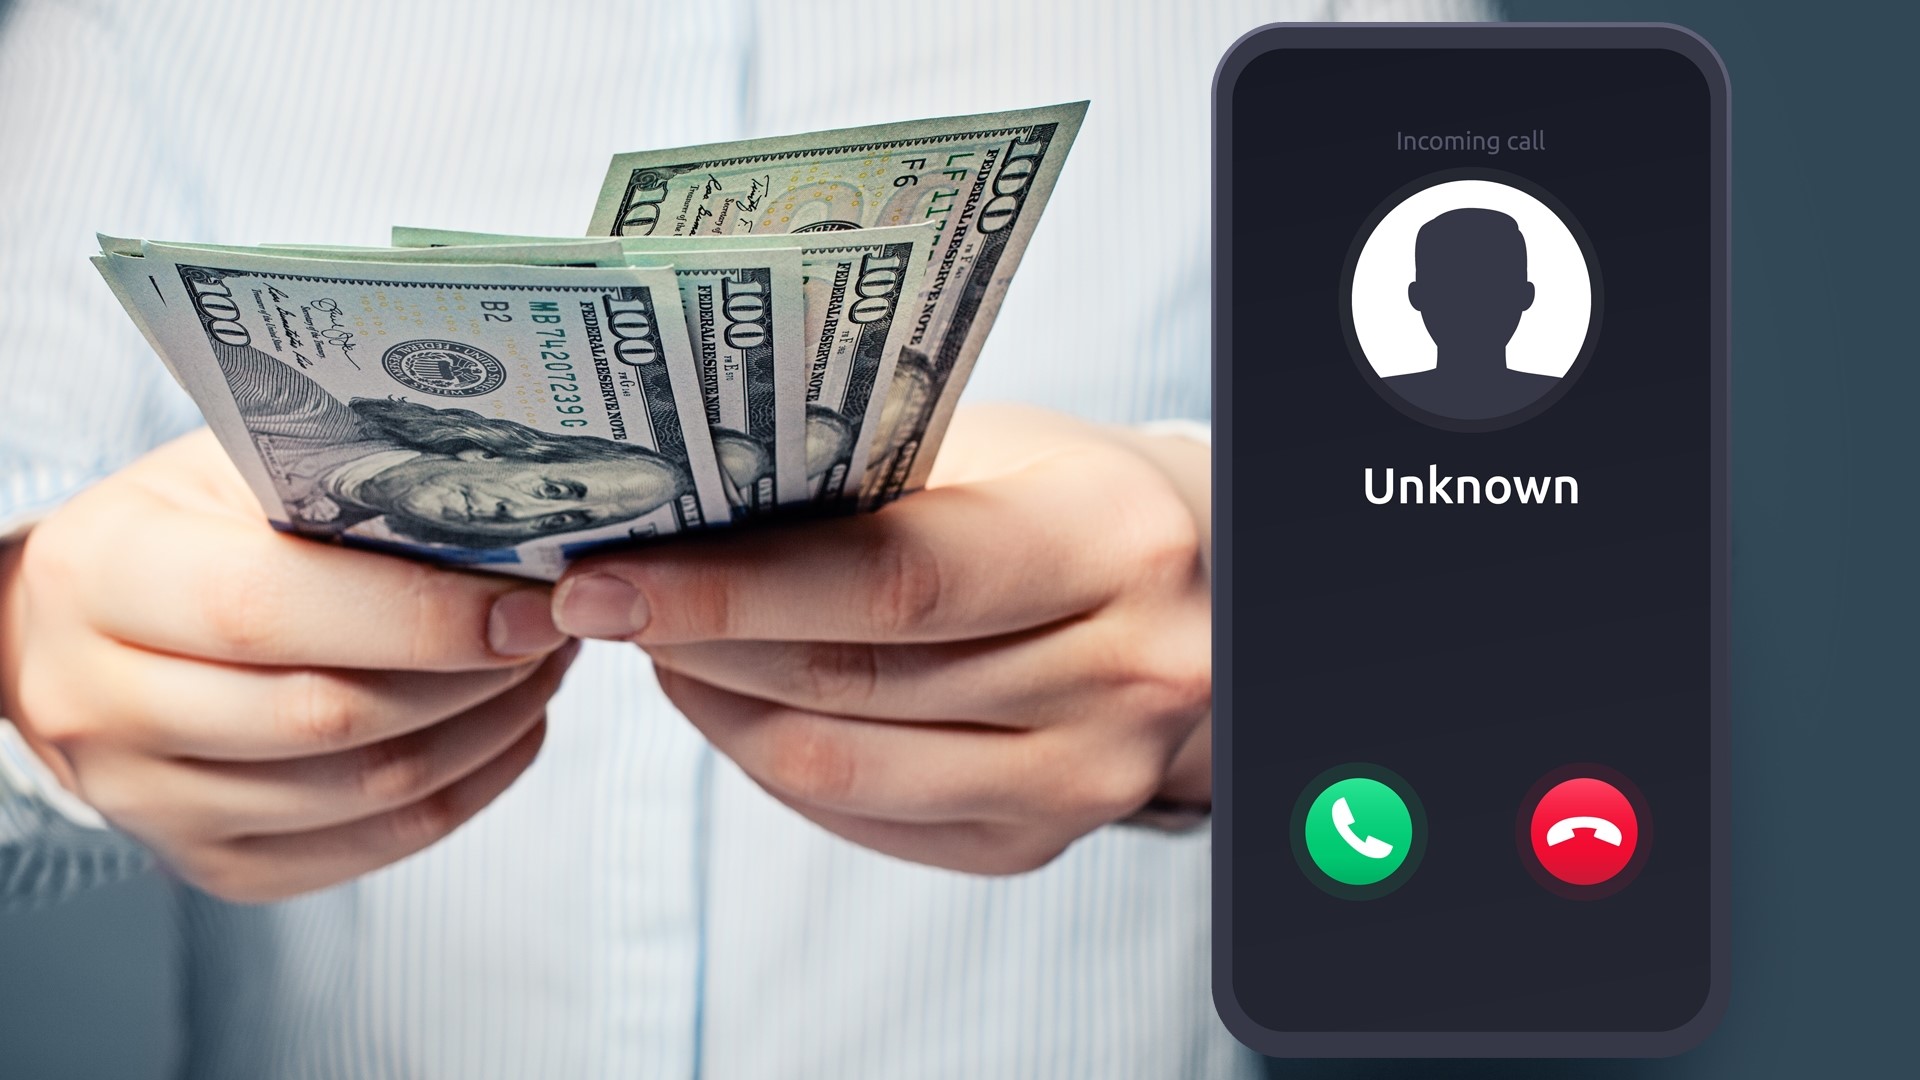 According to estimates based on TrueCaller survey data, more than 835,000 Washingtonians lost money to scam robocalls in 2021.